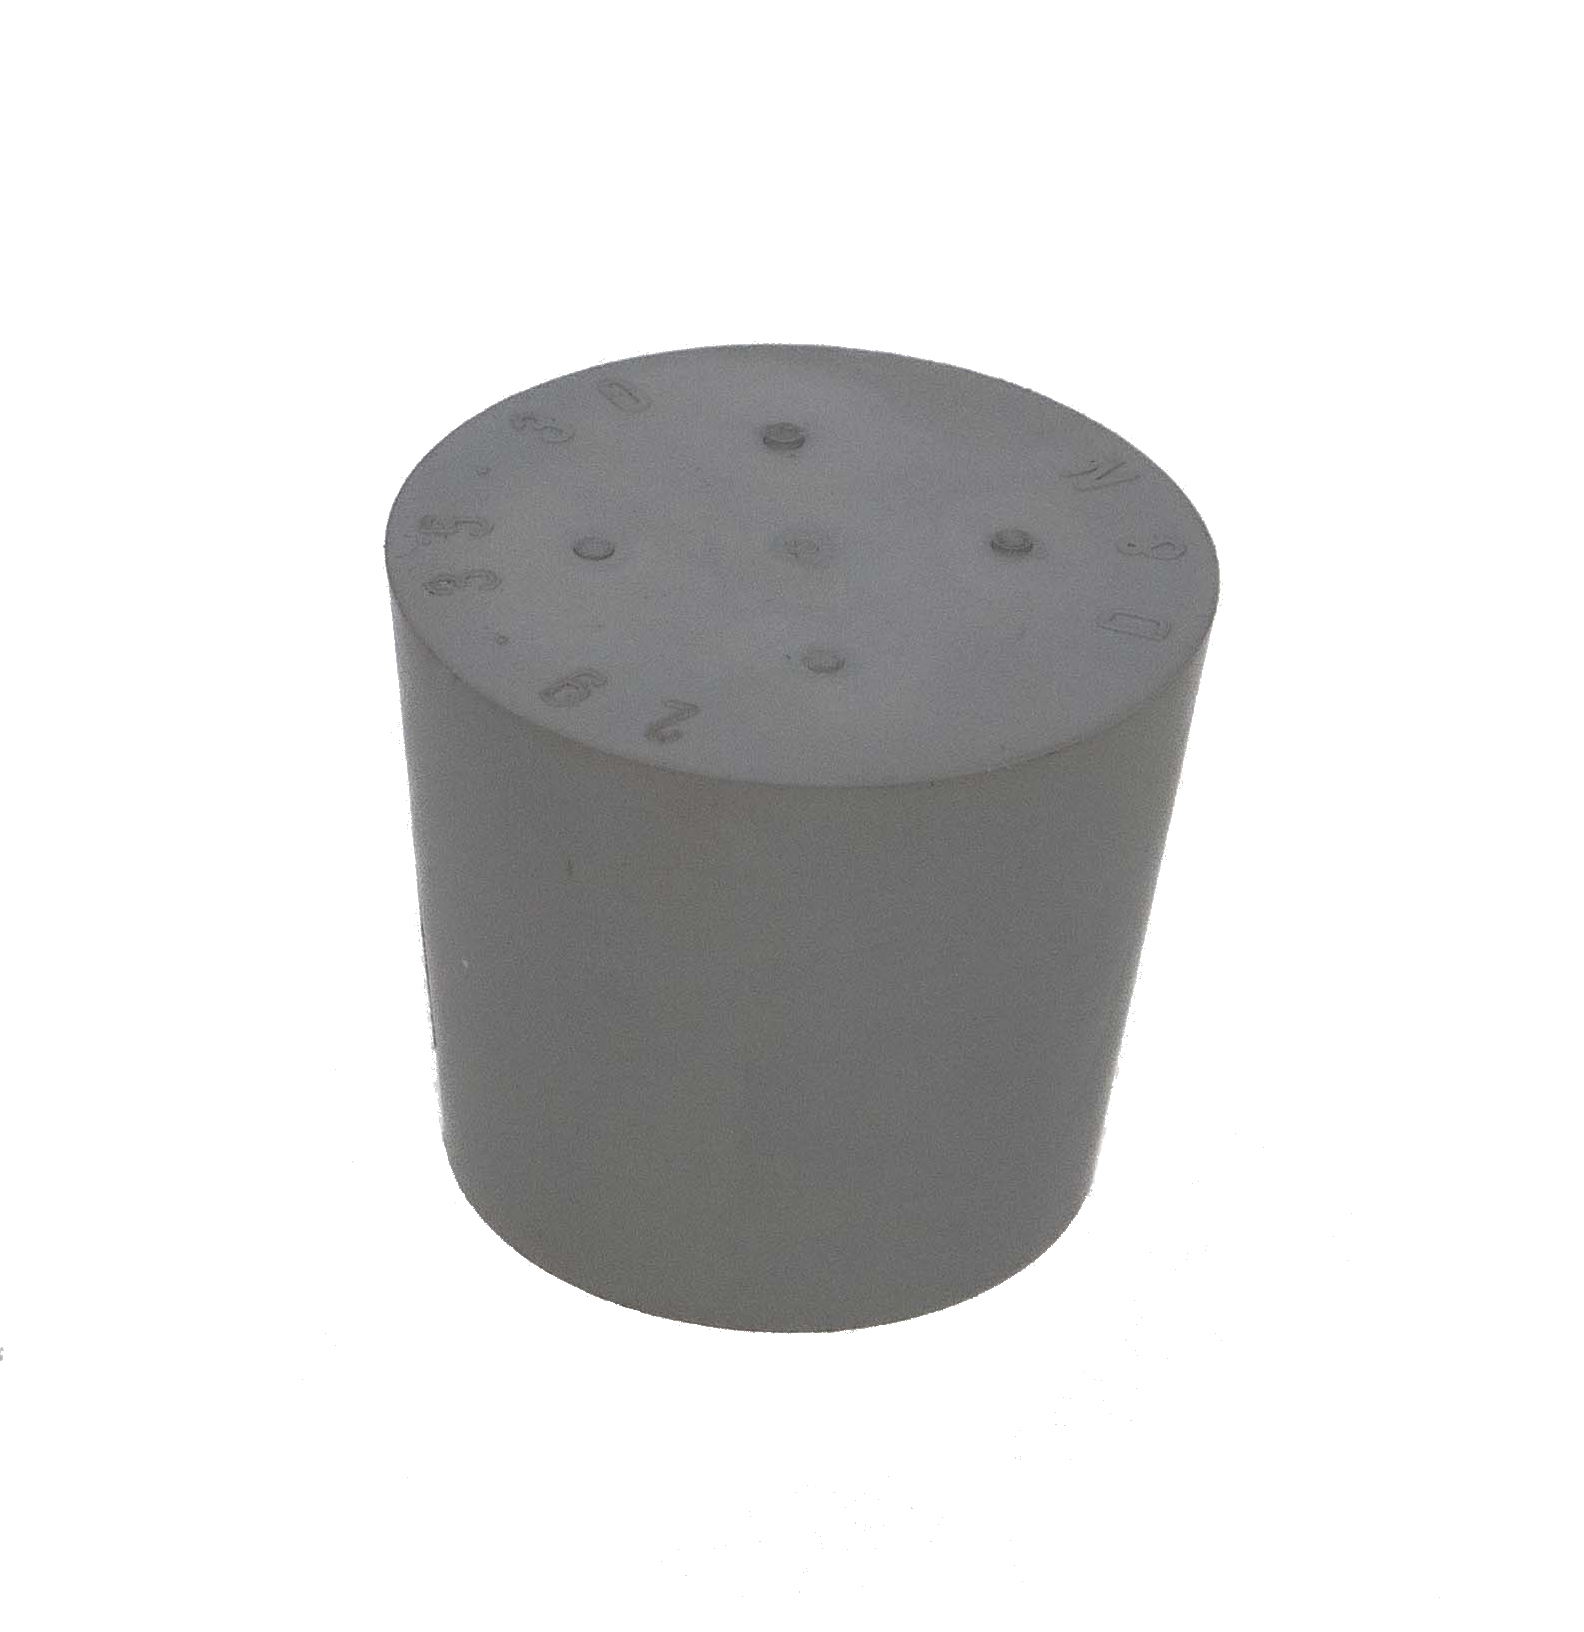 Rubber stopper grey 29 x 35 mm without hole